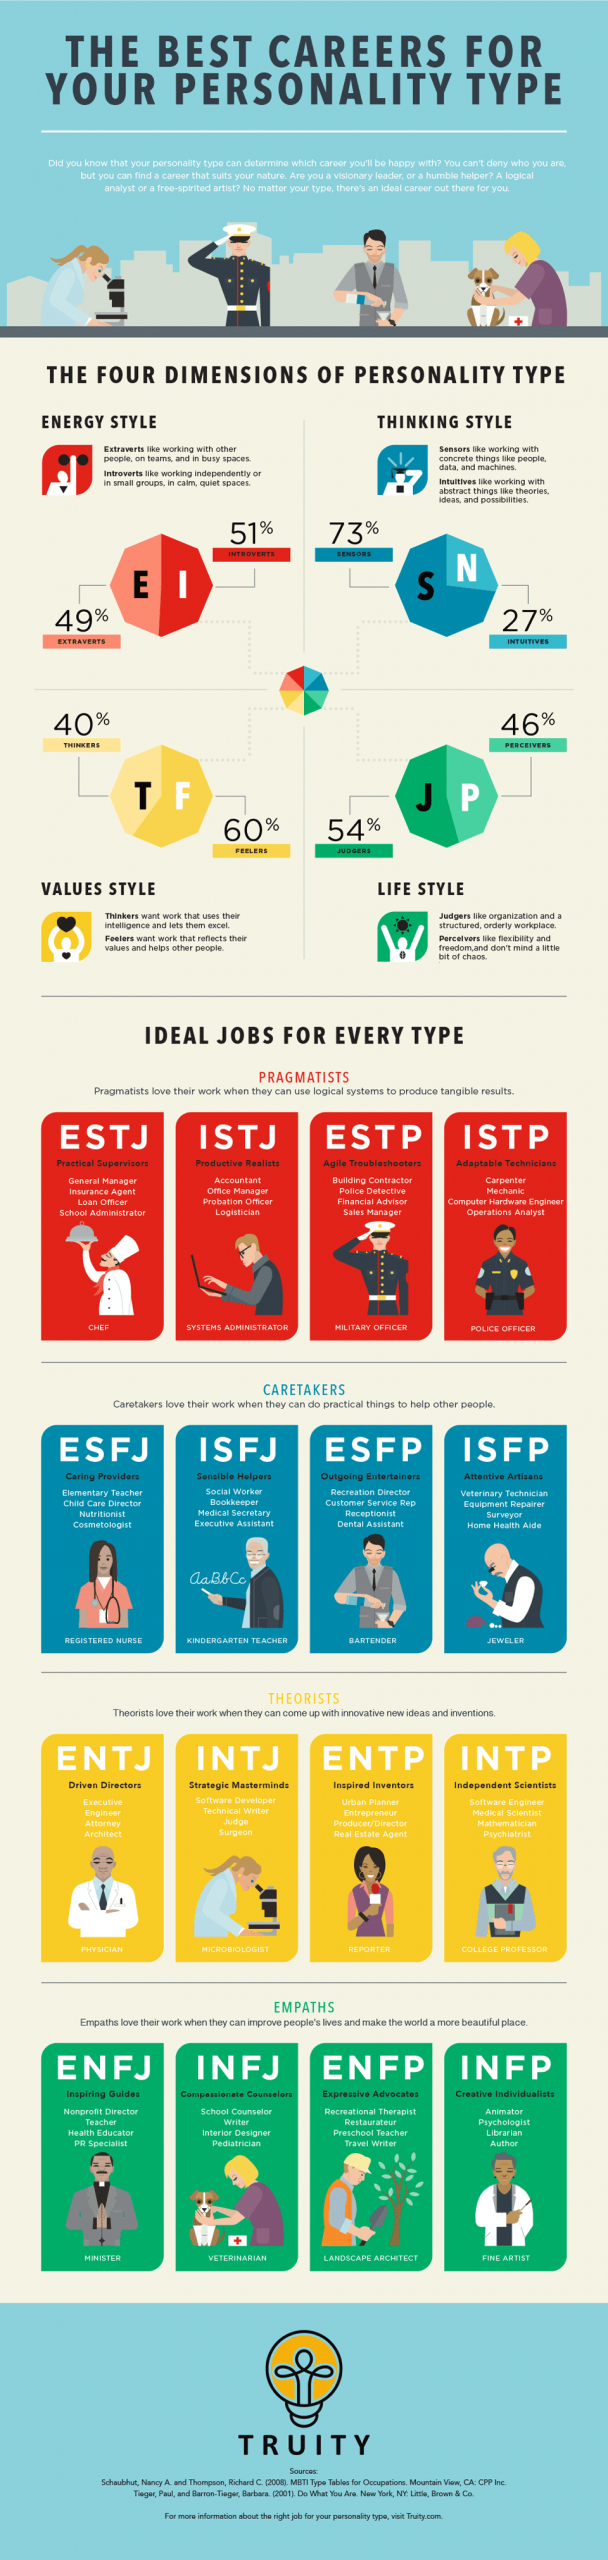 Finding the Right Career for Your Personality